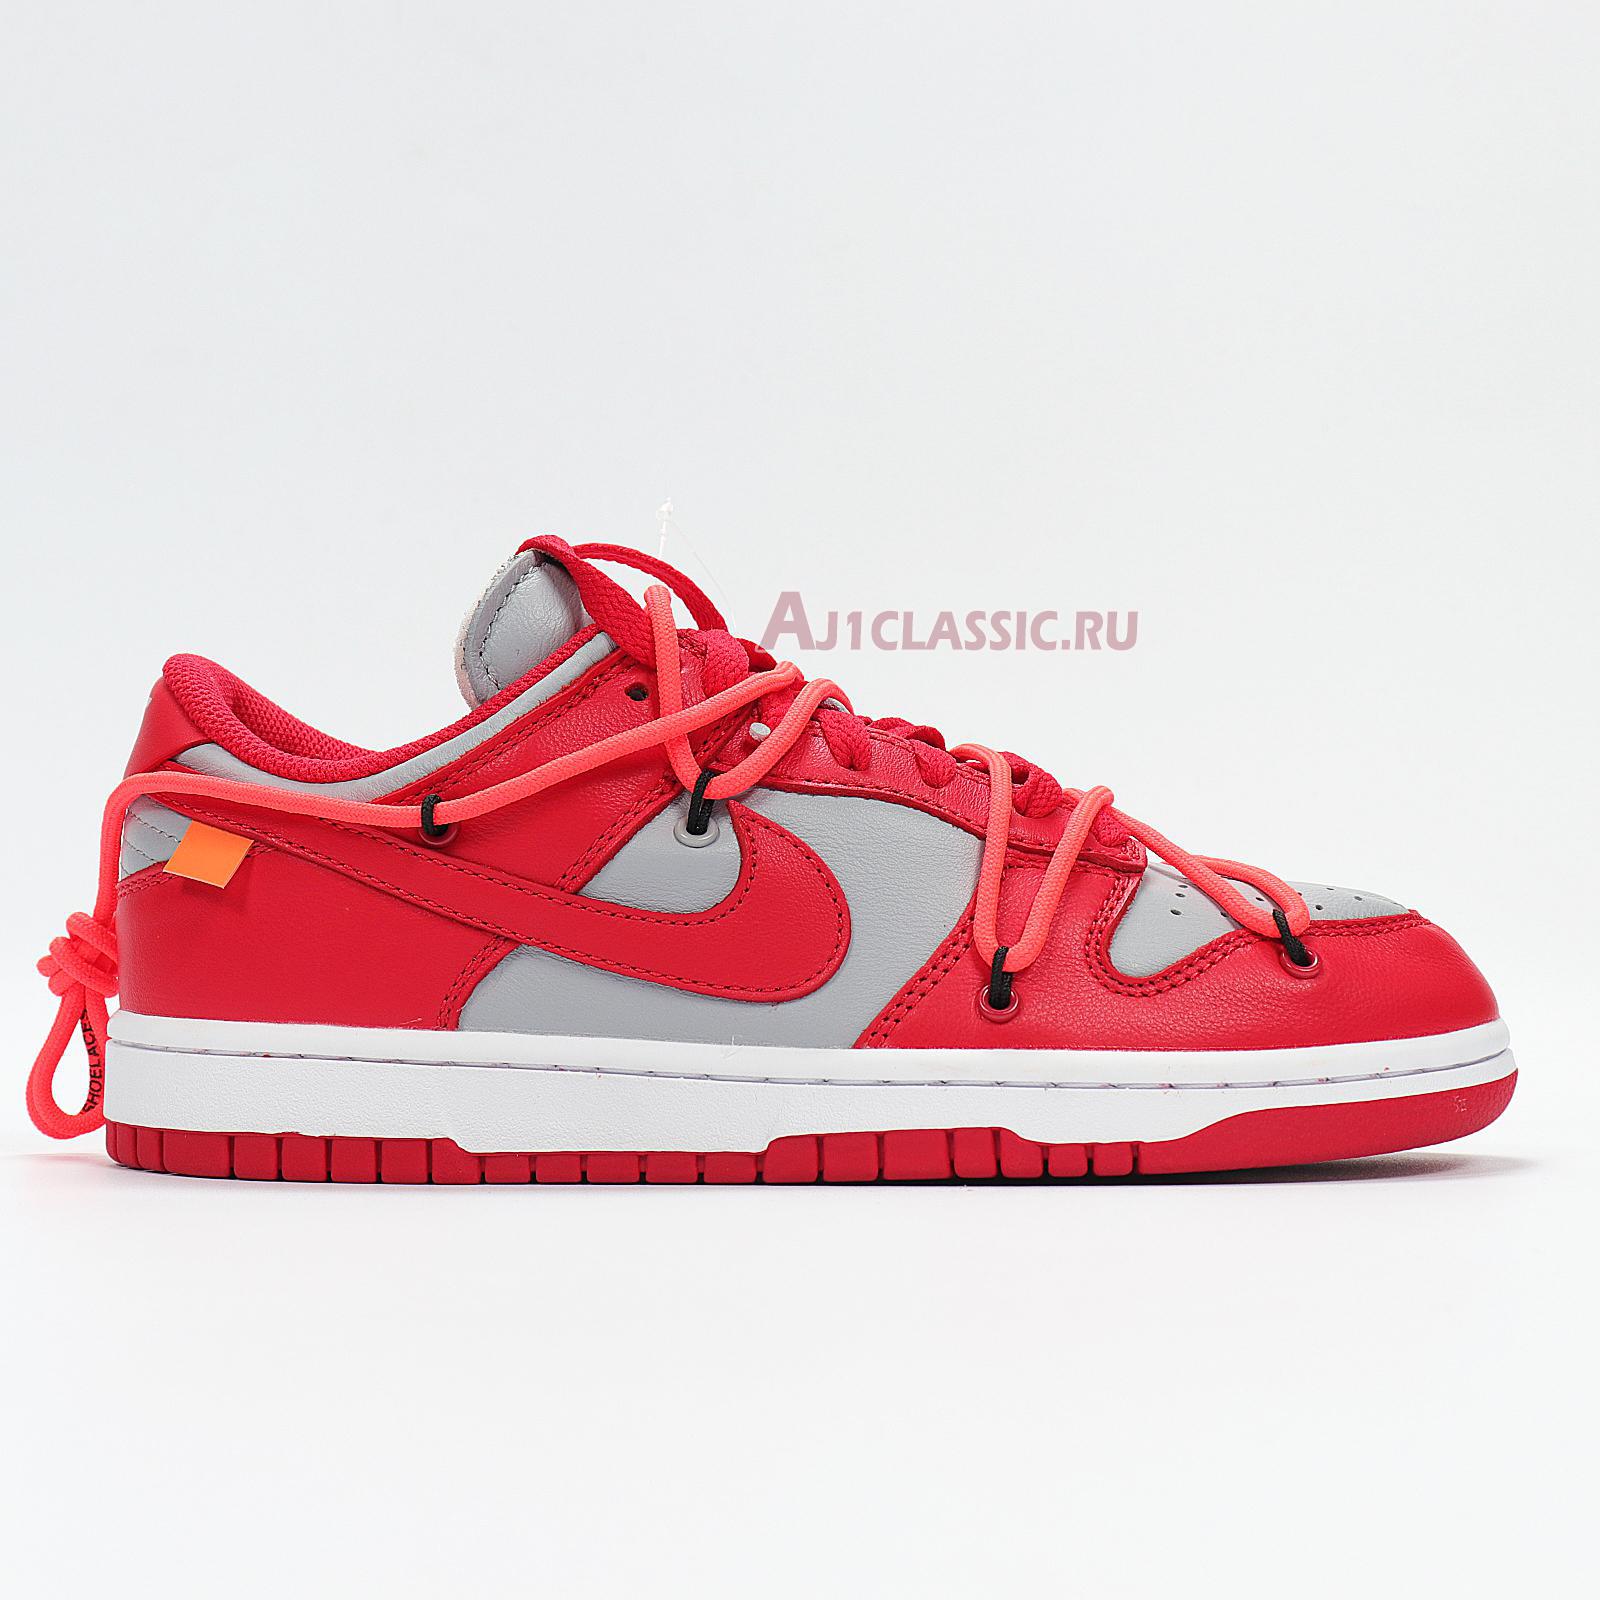 Nike Off-White x Dunk Low University Red CT0856-600 University Red/University Red/Wolf Grey Sneakers